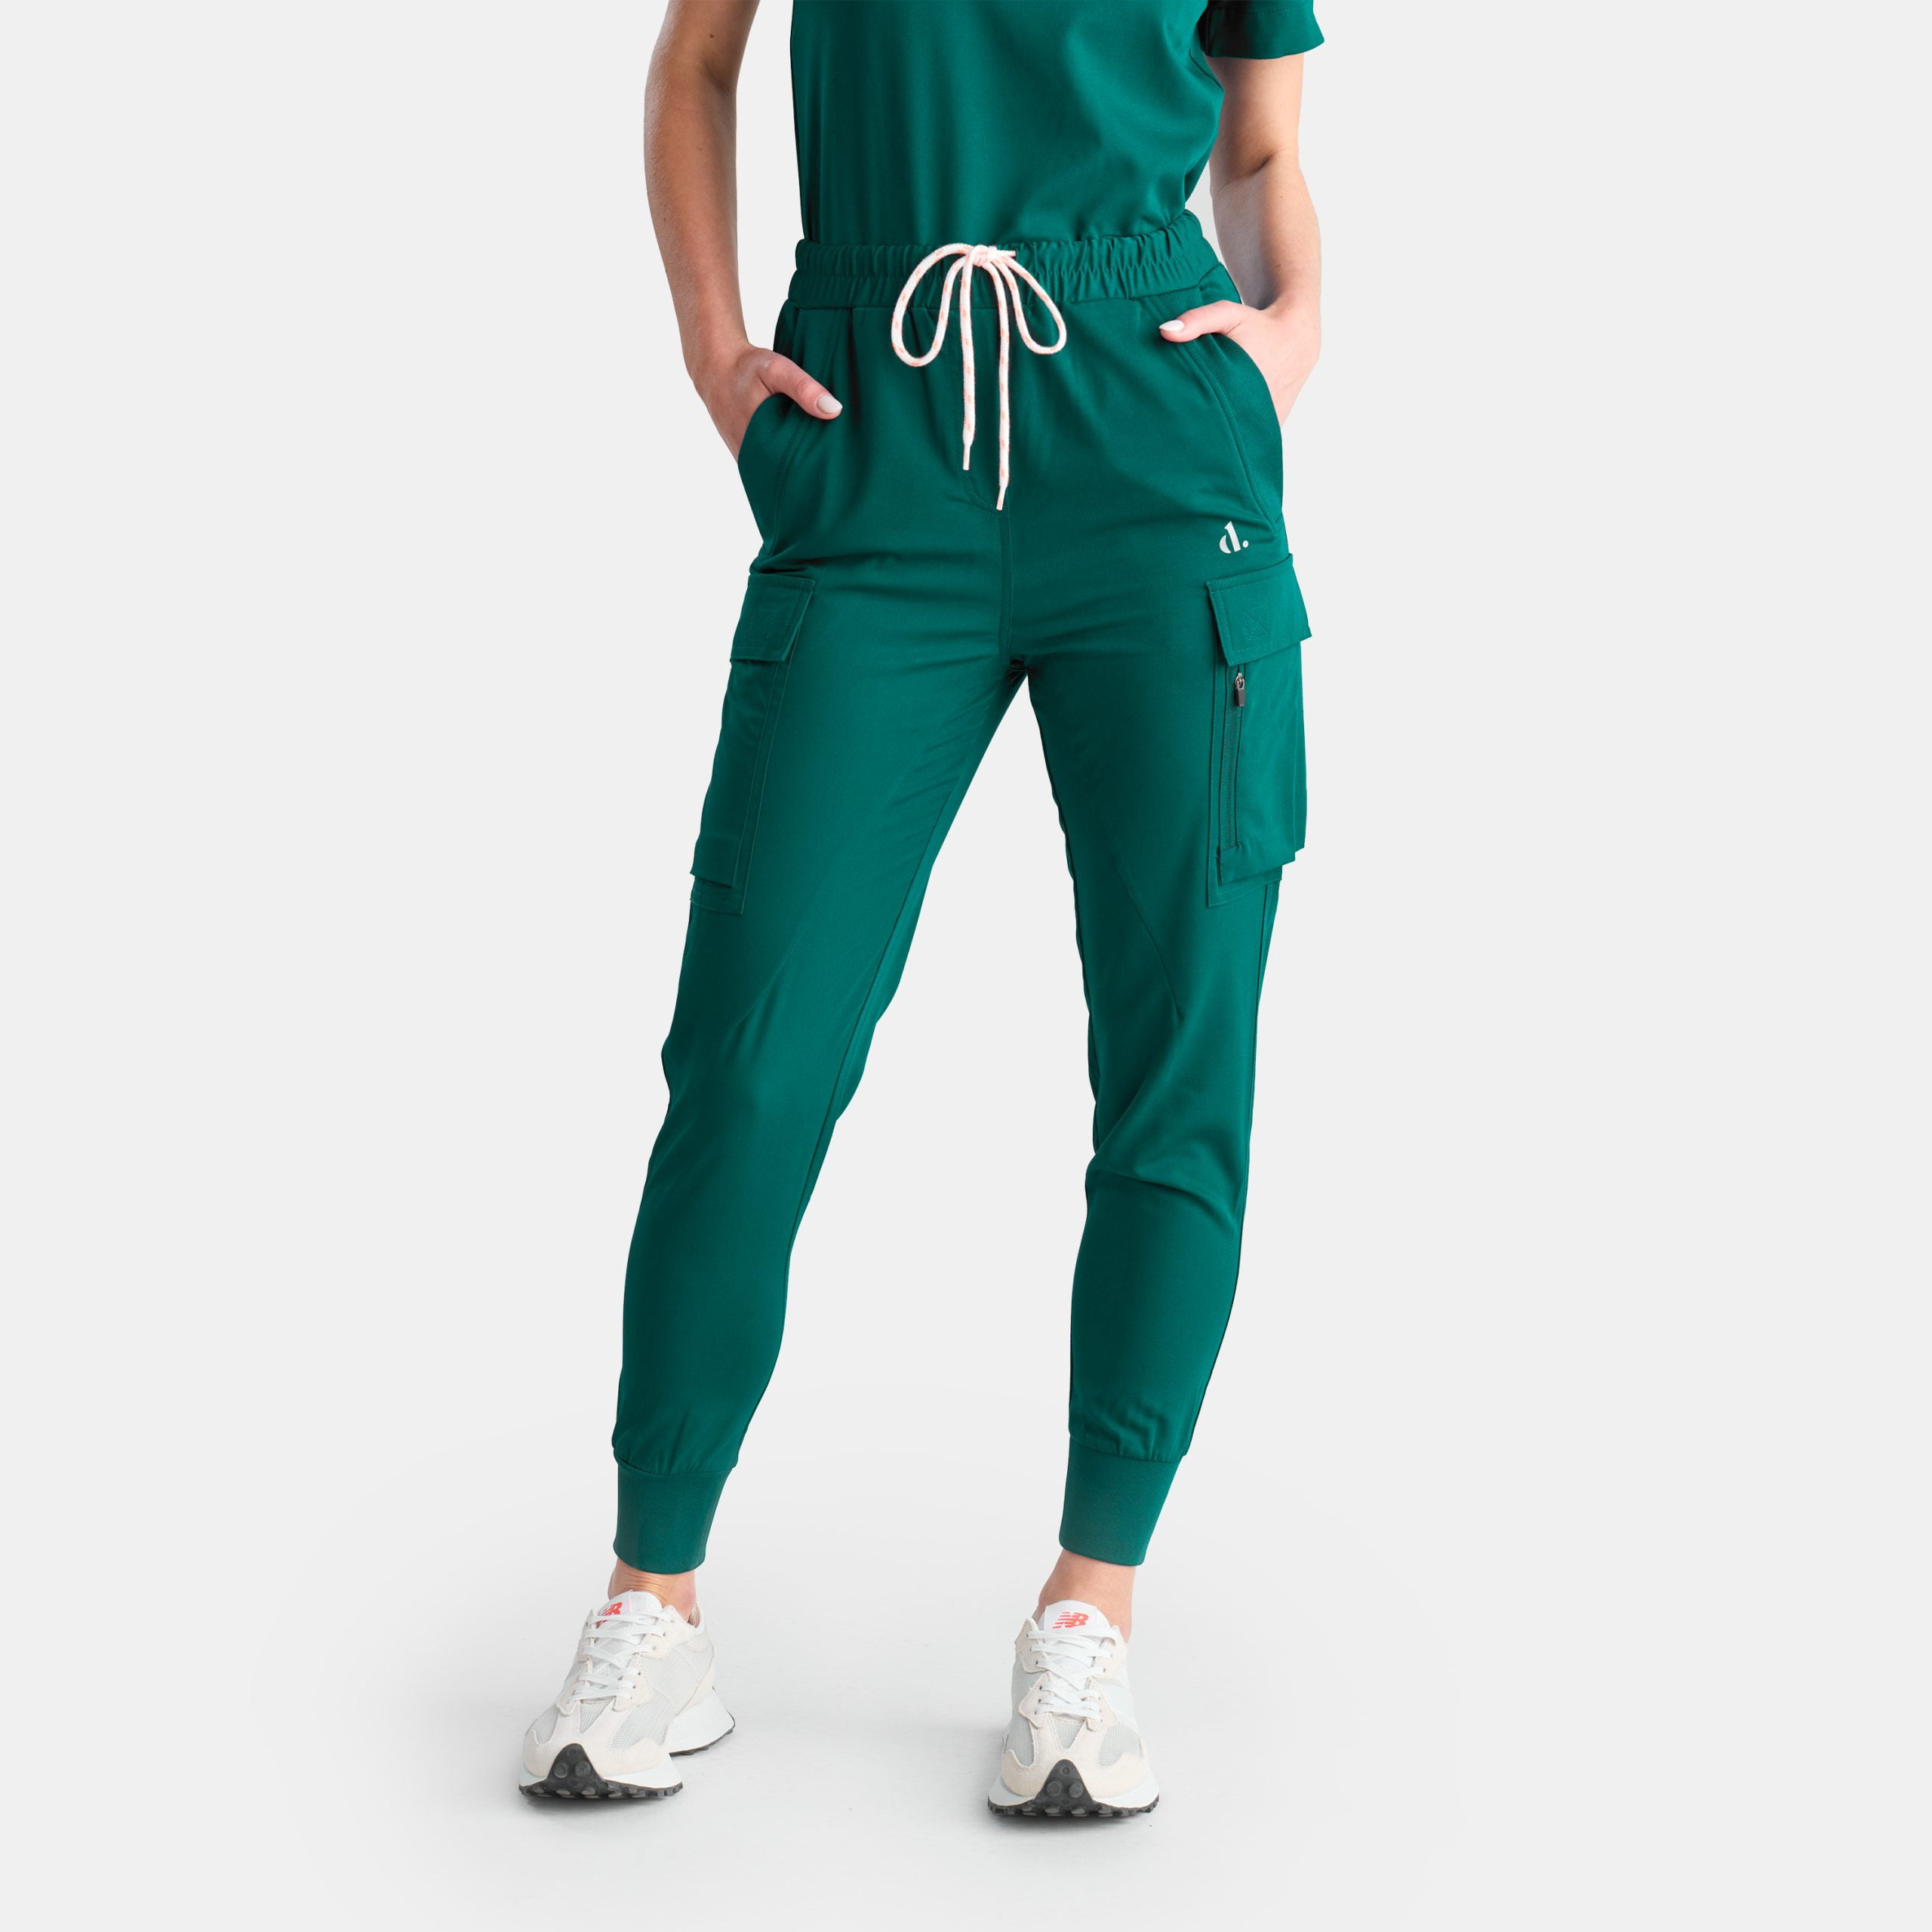 Found that high waisted jogger scrubs make me feel the most